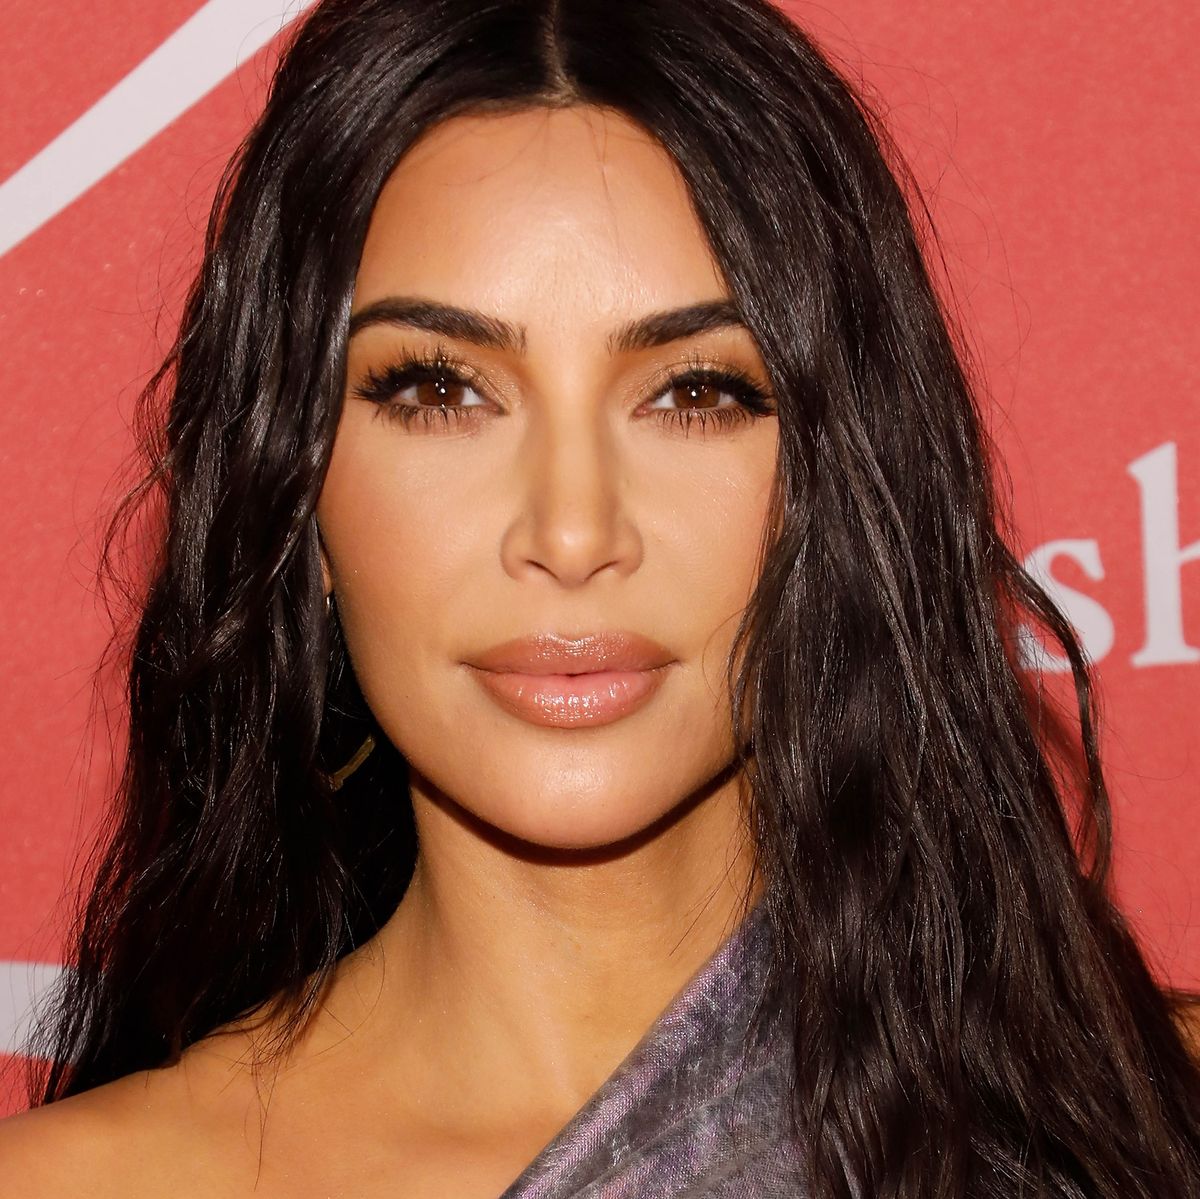 Kim Kardashian West's shares her products for every glam